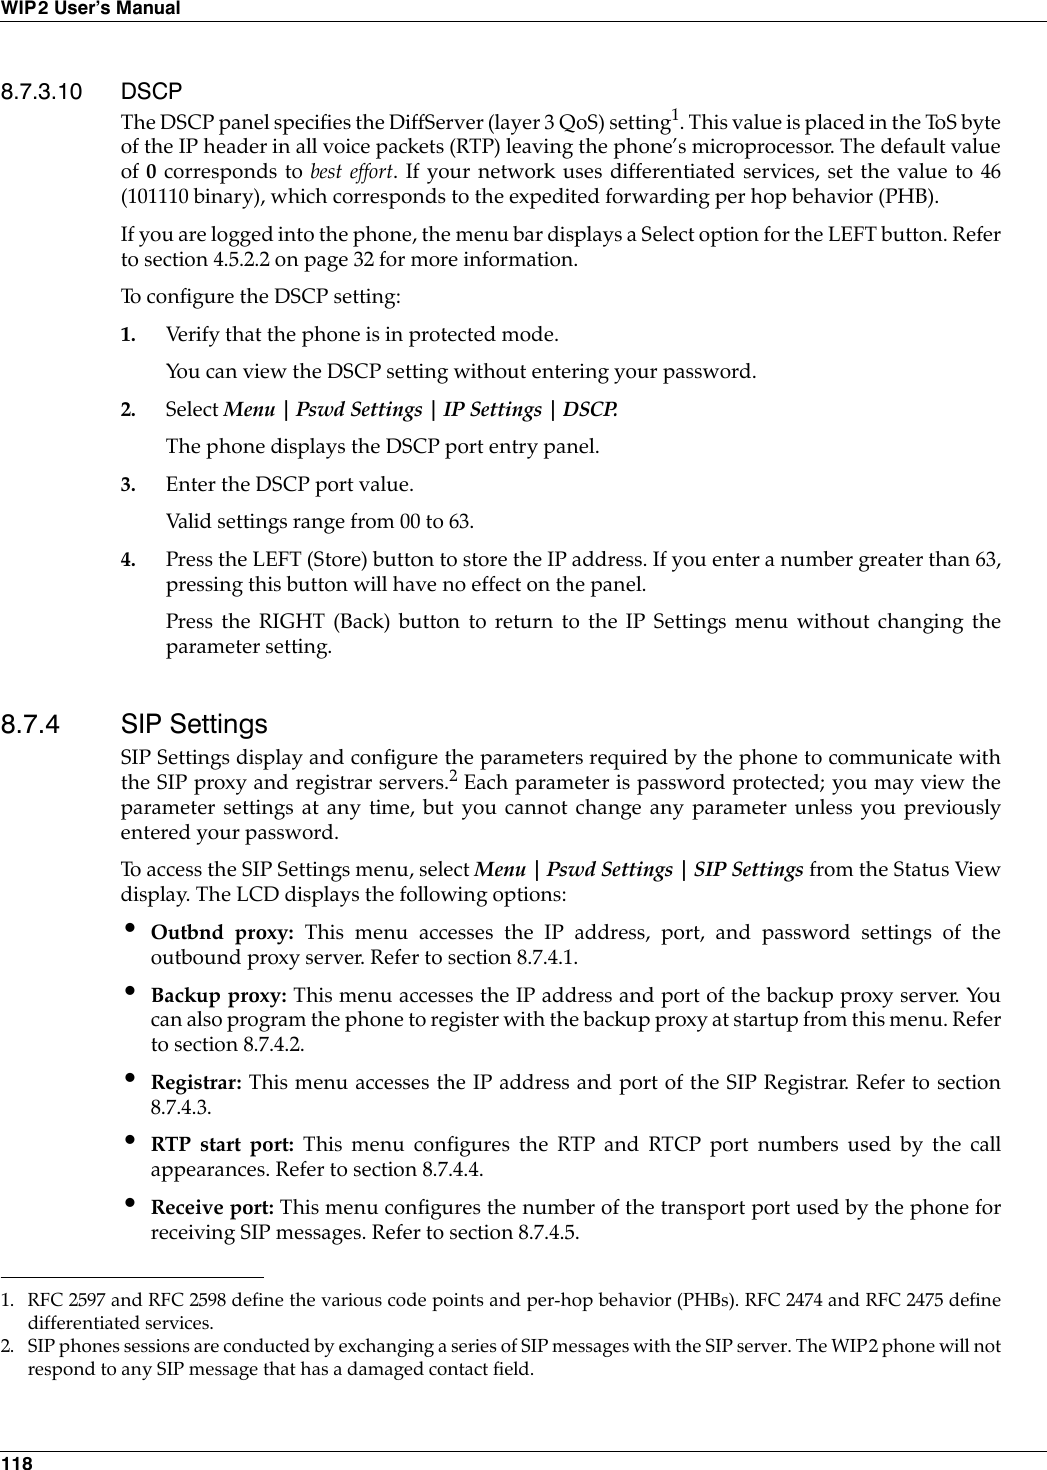 118WIP2 User’s Manual8.7.3.10 DSCPThe DSCP panel specifies the DiffServer (layer 3 QoS) setting1. This value is placed in the ToS byteof the IP header in all voice packets (RTP) leaving the phone’s microprocessor. The default valueof 0 corresponds to best effort. If your network uses differentiated services, set the value to 46(101110 binary), which corresponds to the expedited forwarding per hop behavior (PHB).If you are logged into the phone, the menu bar displays a Select option for the LEFT button. Referto section 4.5.2.2 on page 32 for more information.To configure the DSCP setting:1. Verify that the phone is in protected mode.You can view the DSCP setting without entering your password.2. Select Menu | Pswd Settings | IP Settings | DSCP.The phone displays the DSCP port entry panel.3. Enter the DSCP port value.Valid settings range from 00 to 63.4. Press the LEFT (Store) button to store the IP address. If you enter a number greater than 63,pressing this button will have no effect on the panel.Press the RIGHT (Back) button to return to the IP Settings menu without changing theparameter setting.8.7.4 SIP SettingsSIP Settings display and configure the parameters required by the phone to communicate withthe SIP proxy and registrar servers.2 Each parameter is password protected; you may view theparameter settings at any time, but you cannot change any parameter unless you previouslyentered your password.To access the SIP Settings menu, select Menu | Pswd Settings | SIP Settings from the Status Viewdisplay. The LCD displays the following options:•Outbnd proxy: This menu accesses the IP address, port, and password settings of theoutbound proxy server. Refer to section 8.7.4.1.•Backup proxy: This menu accesses the IP address and port of the backup proxy server. Youcan also program the phone to register with the backup proxy at startup from this menu. Referto section 8.7.4.2.•Registrar: This menu accesses the IP address and port of the SIP Registrar. Refer to section8.7.4.3.•RTP start port: This menu configures the RTP and RTCP port numbers used by the callappearances. Refer to section 8.7.4.4.•Receive port: This menu configures the number of the transport port used by the phone forreceiving SIP messages. Refer to section 8.7.4.5.1. RFC 2597 and RFC 2598 define the various code points and per-hop behavior (PHBs). RFC 2474 and RFC 2475 definedifferentiated services.2. SIP phones sessions are conducted by exchanging a series of SIP messages with the SIP server. The WIP2 phone will notrespond to any SIP message that has a damaged contact field. 